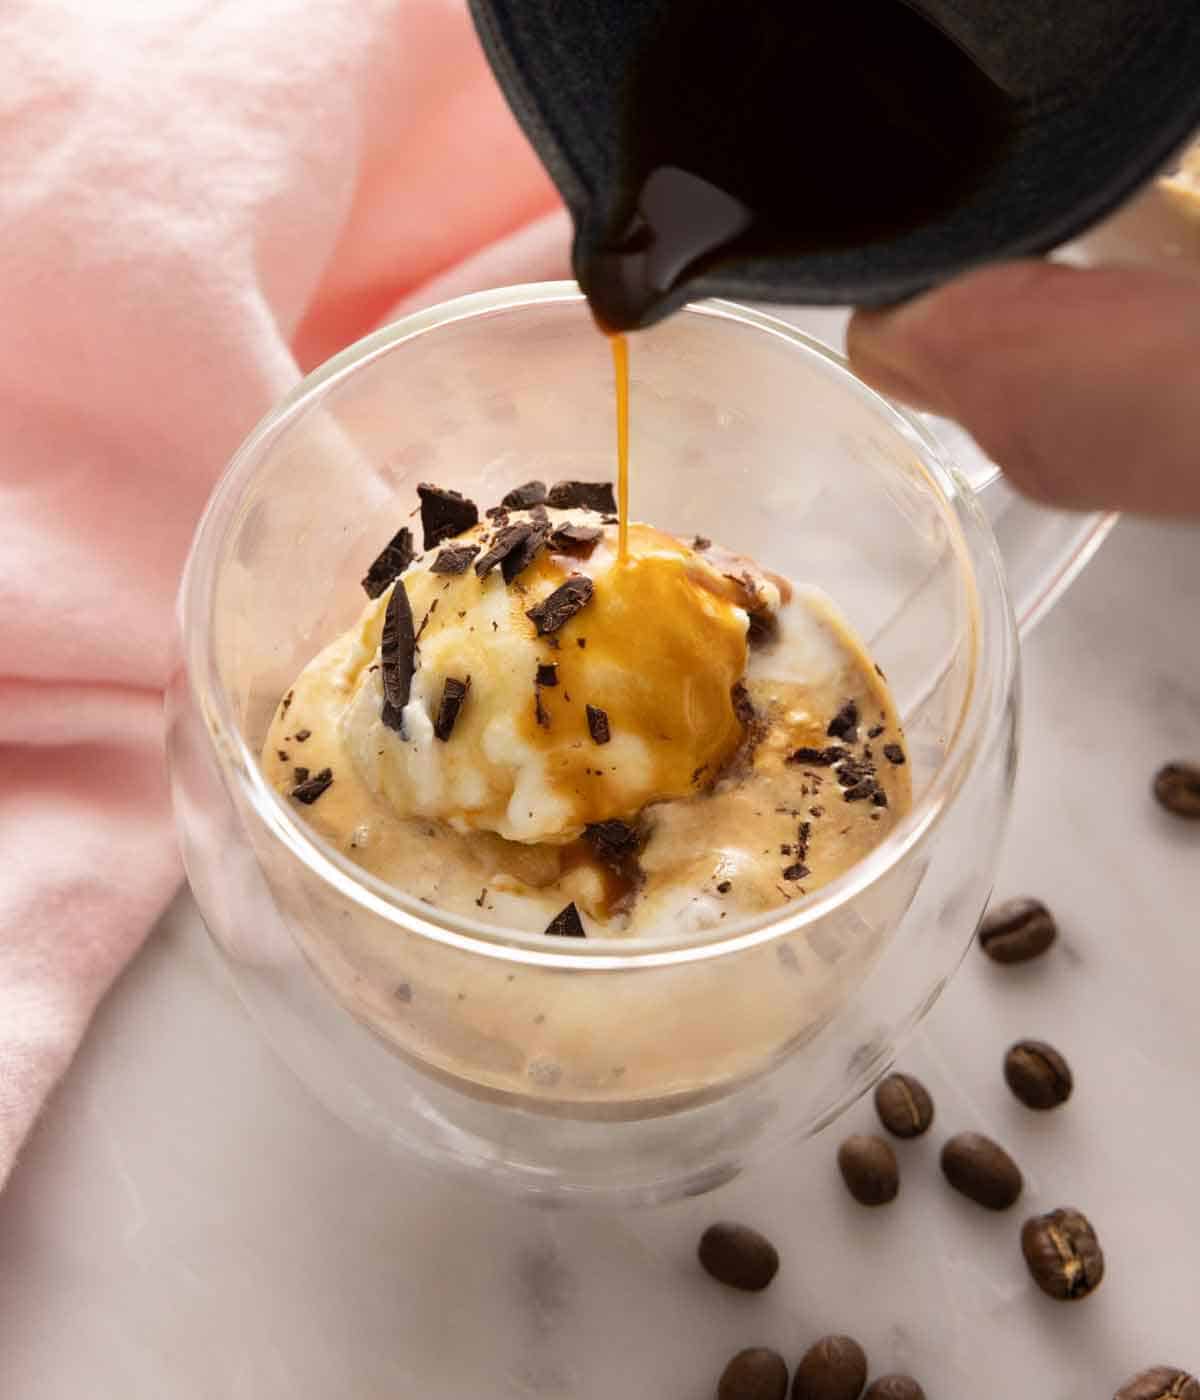 A cup of ice cream with espresso poured over.